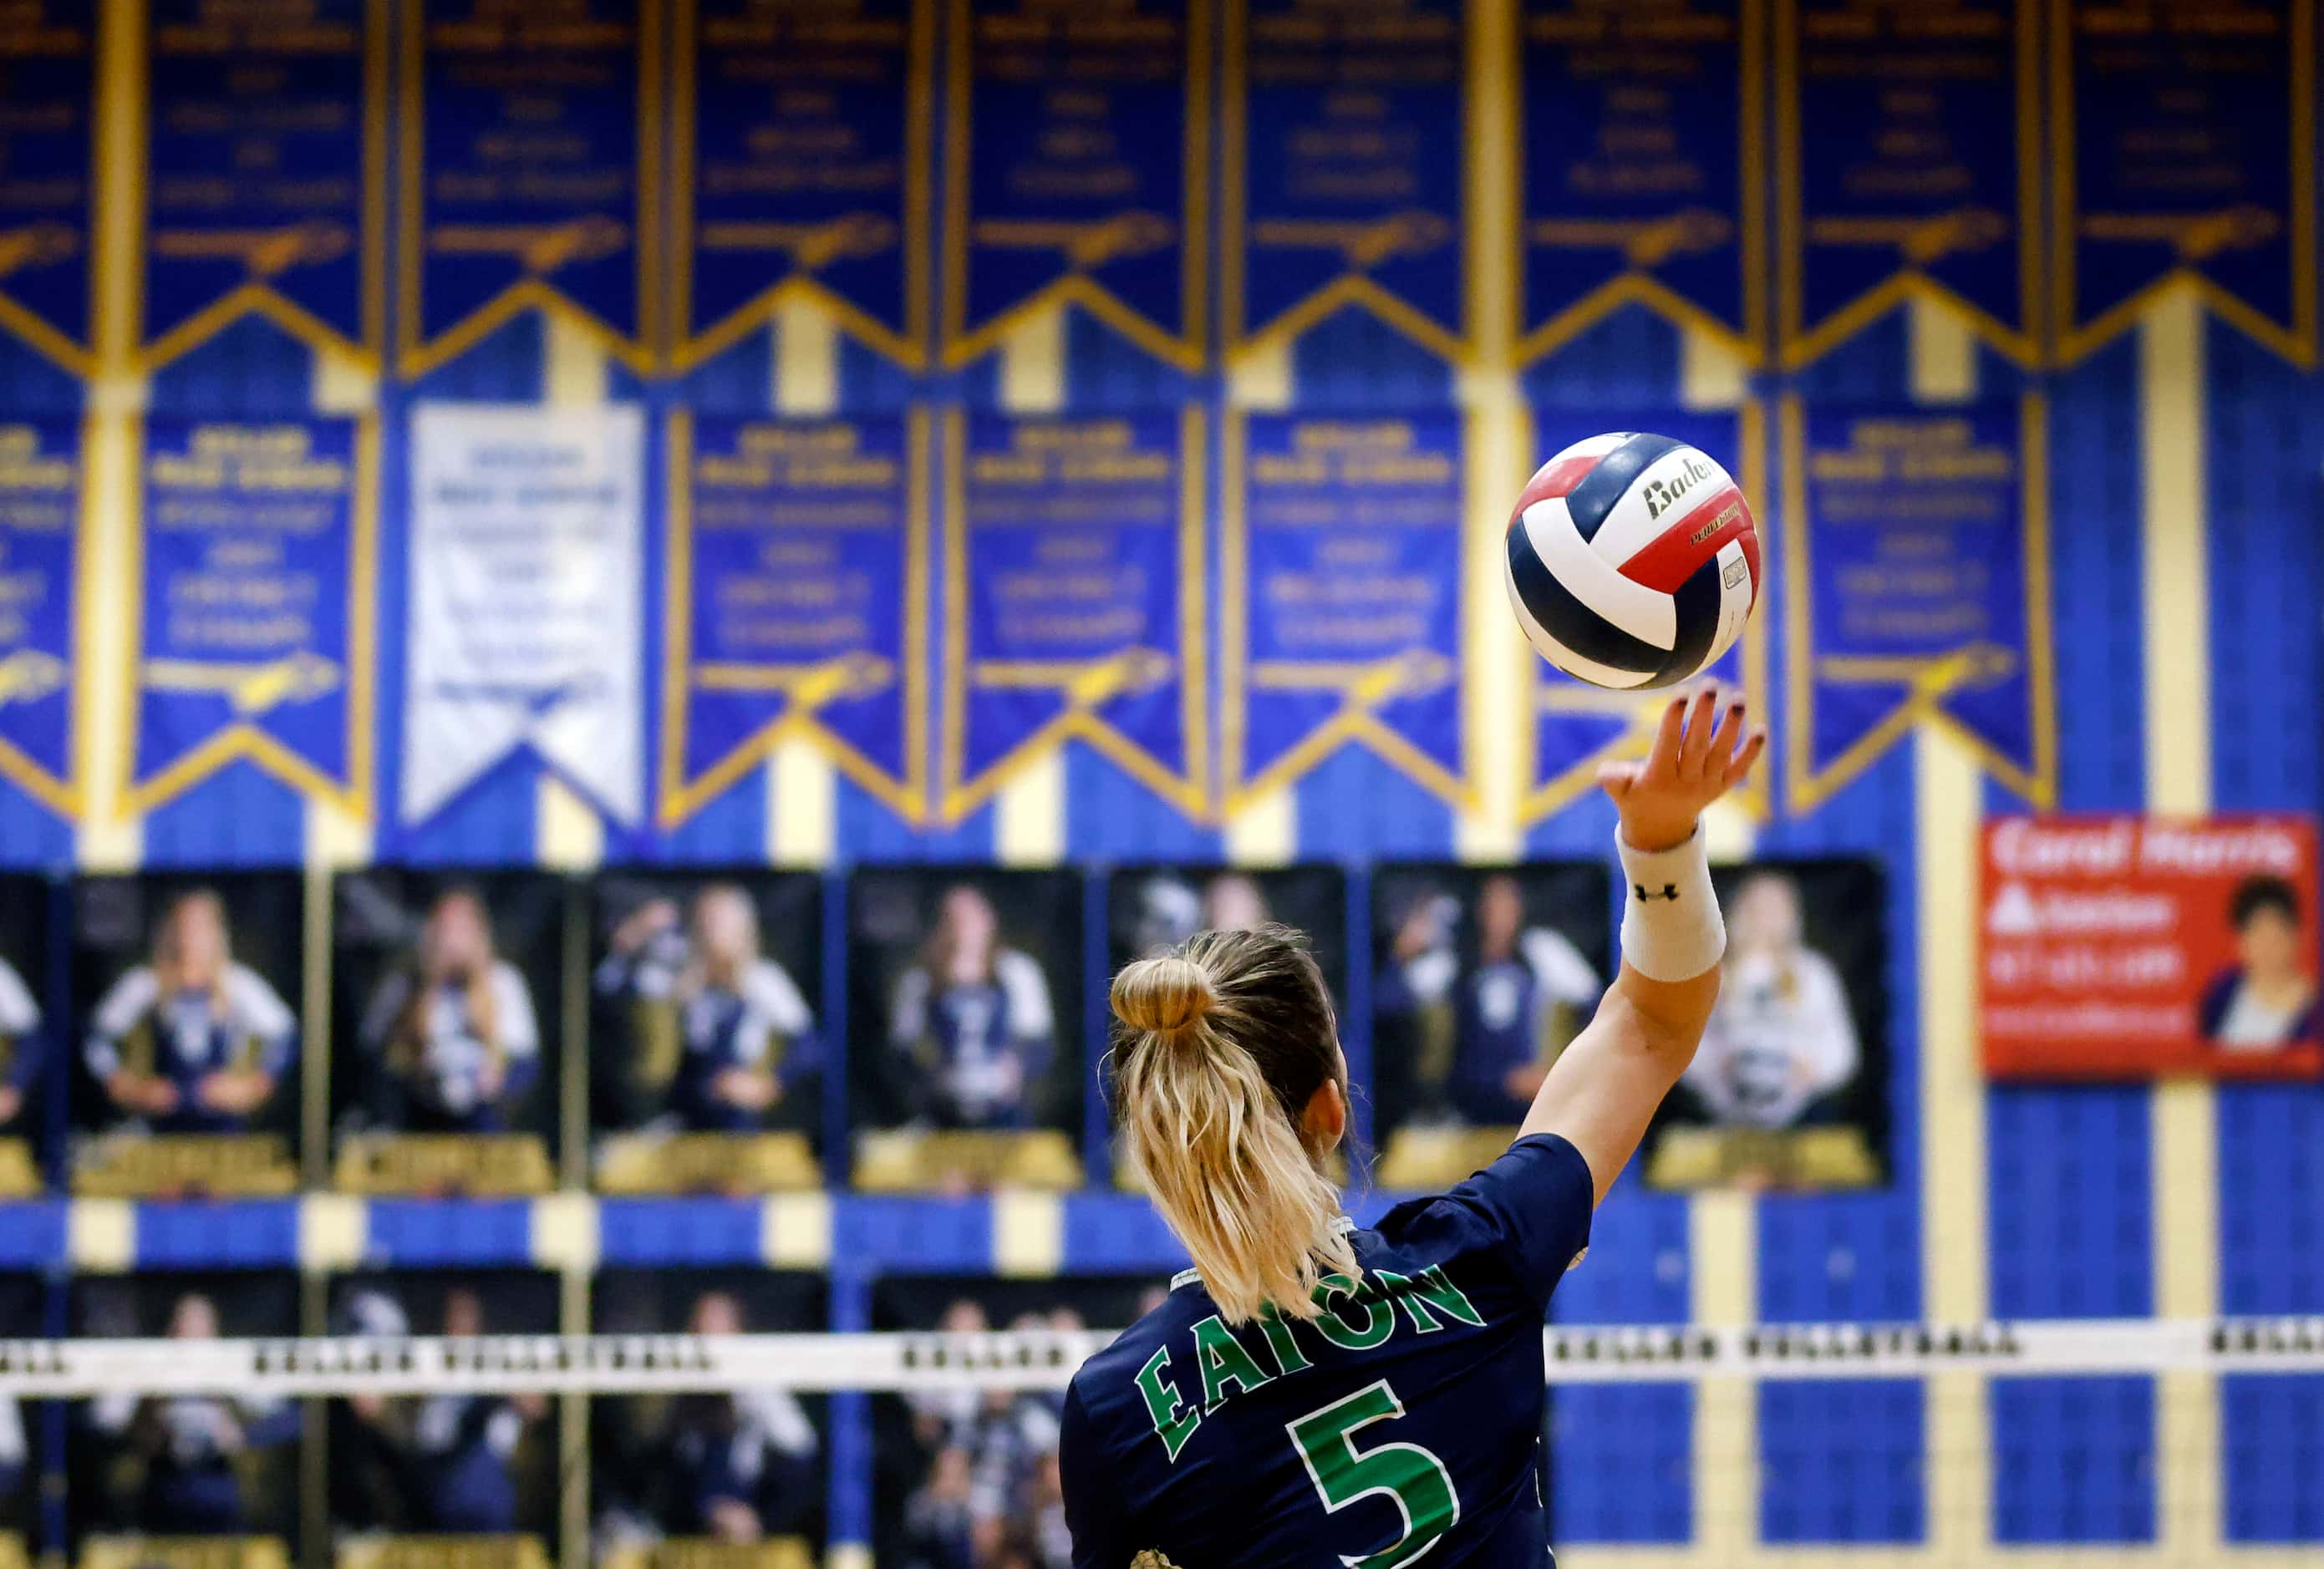 Eaton High’s Emily Simmons (15) serves the ball against Keller High during their volleyball...